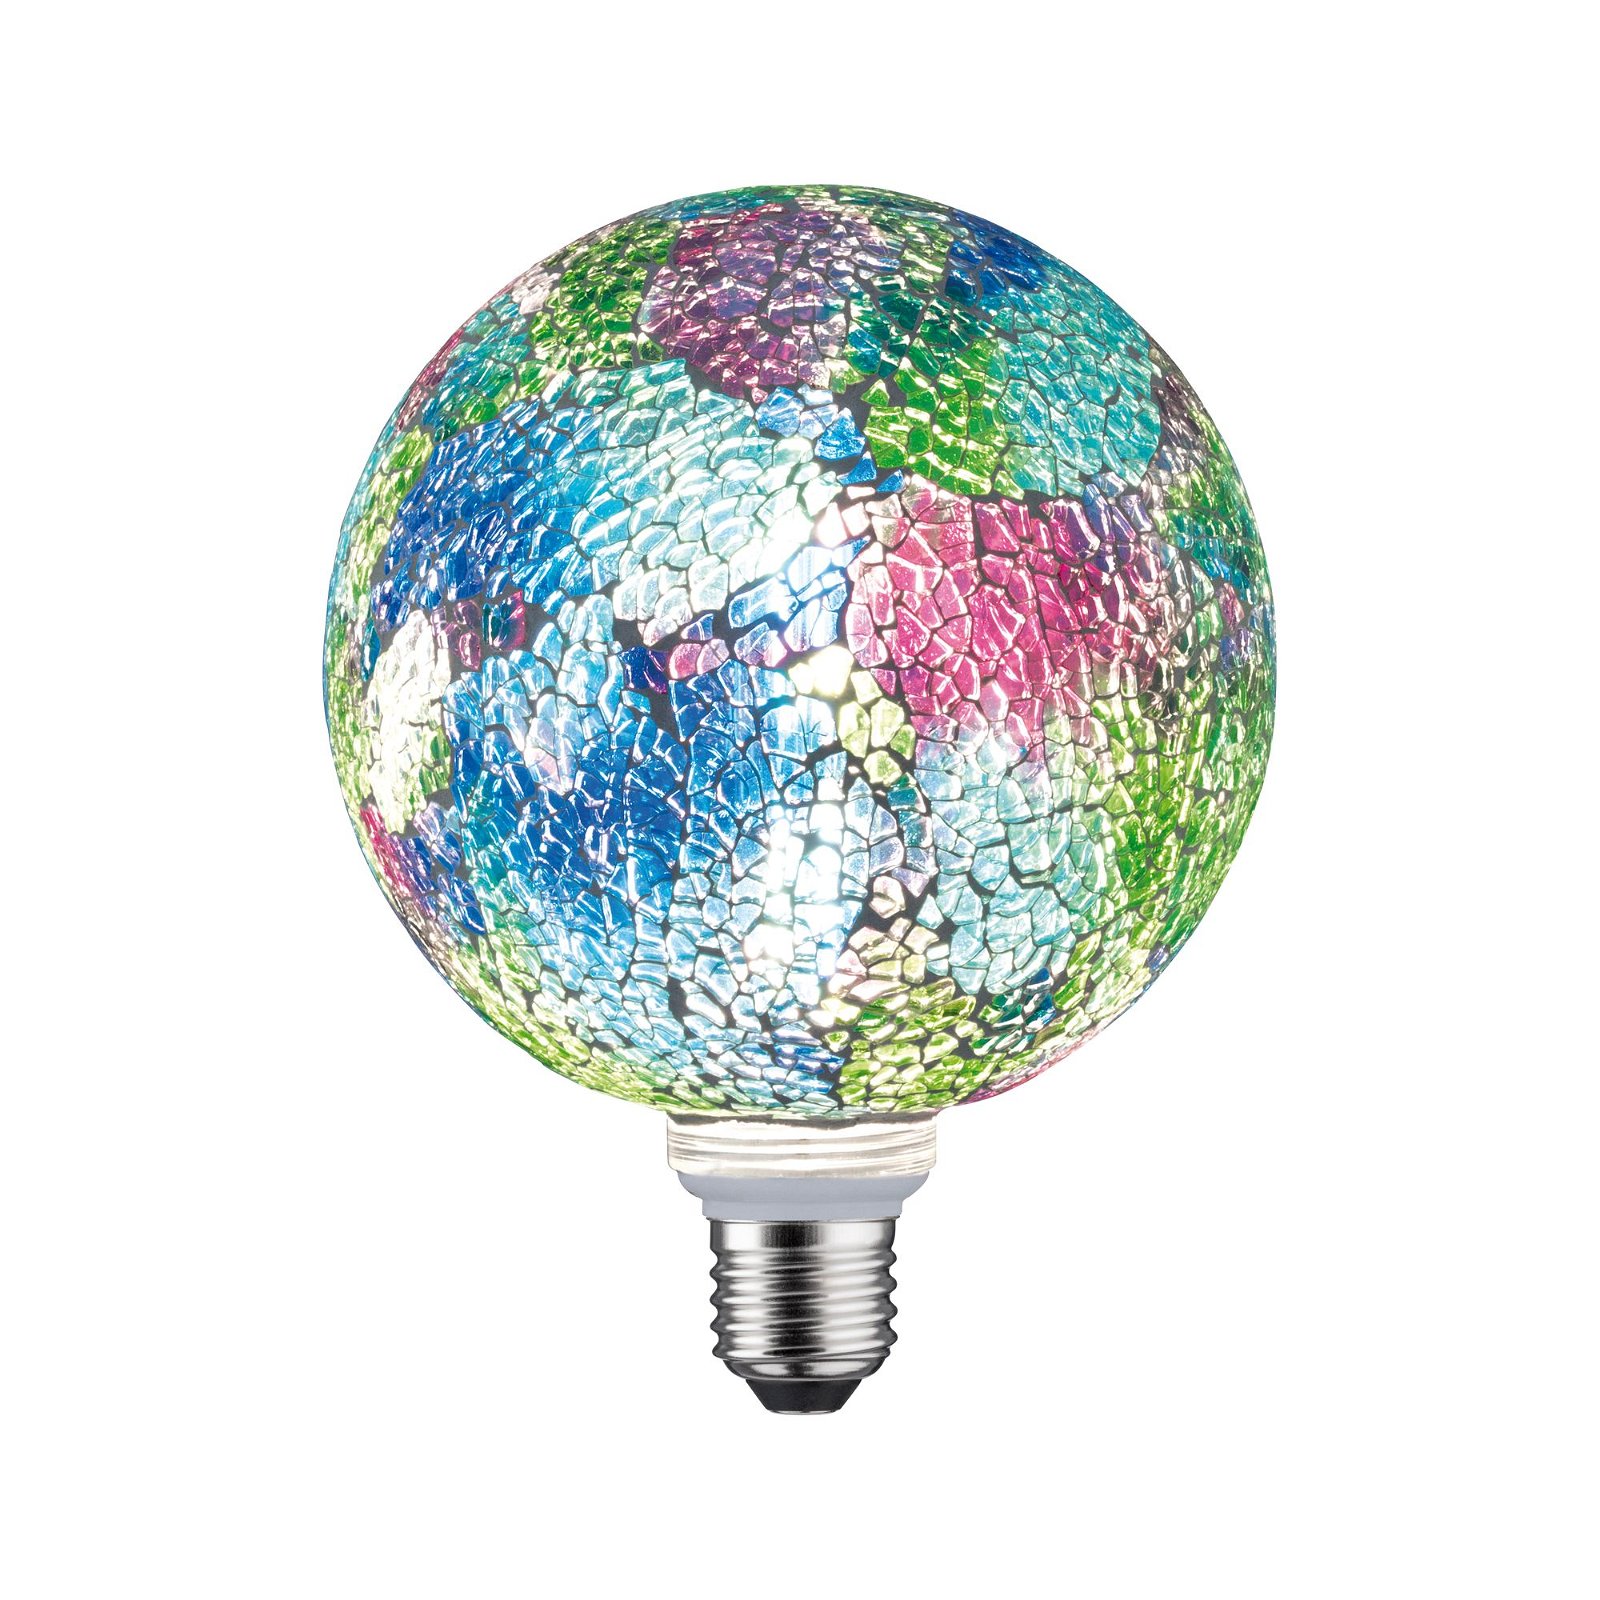 Miracle Mosaic Edition 230 V Standard LED Globe G125 E27 470lm 5W 2700K dimmable Multicolour